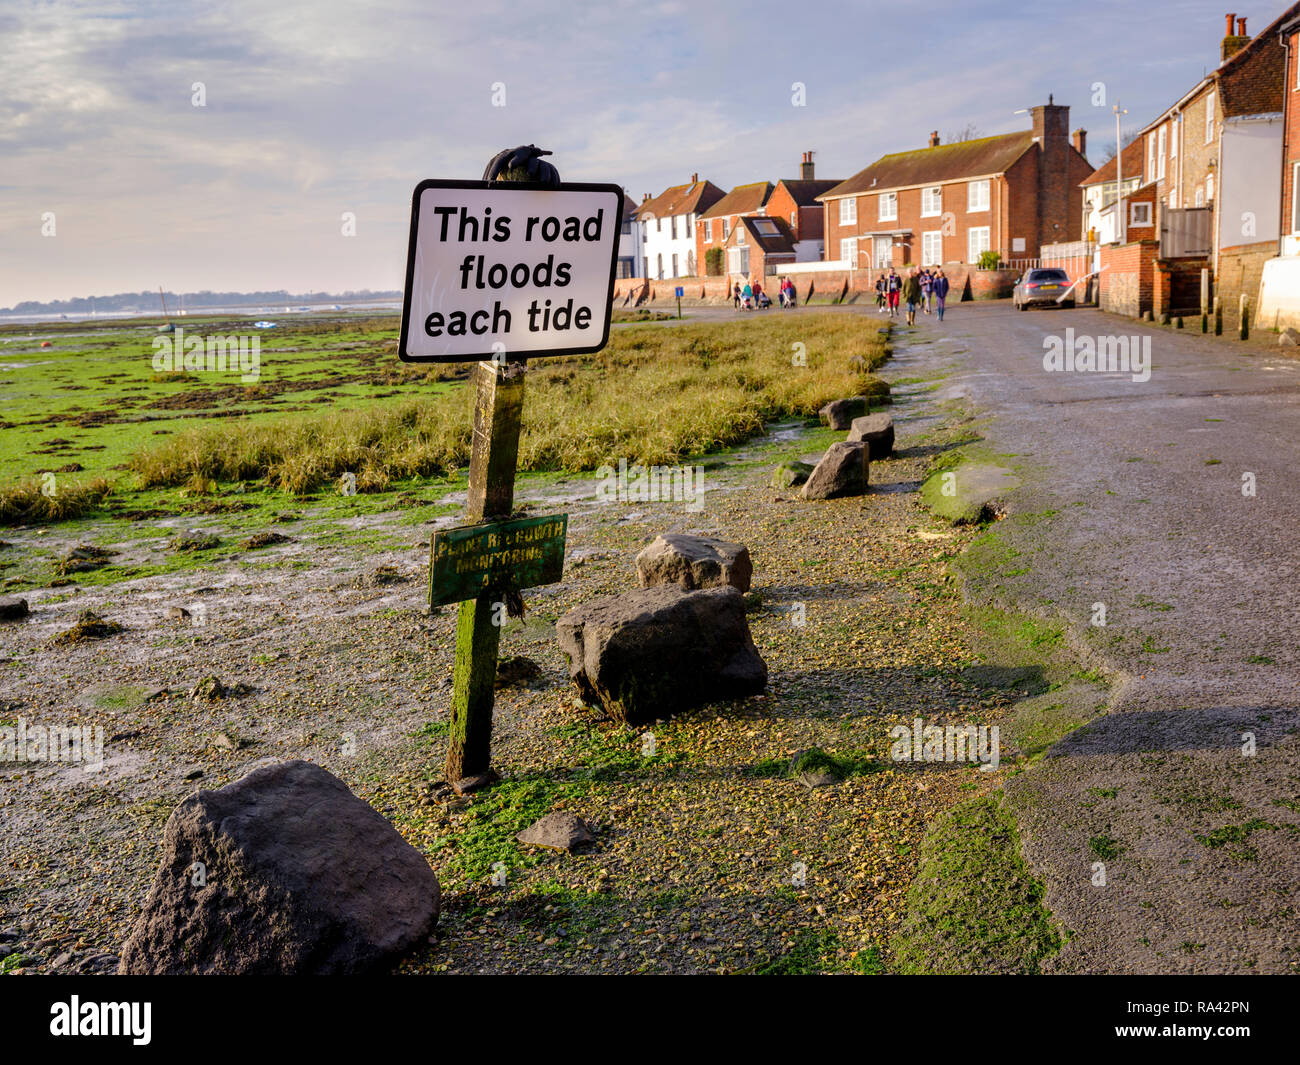 A sign saying 'This road floods each tide' on Shore Road Bosham Harbour near Chichester, West Sussex UK. Stock Photo